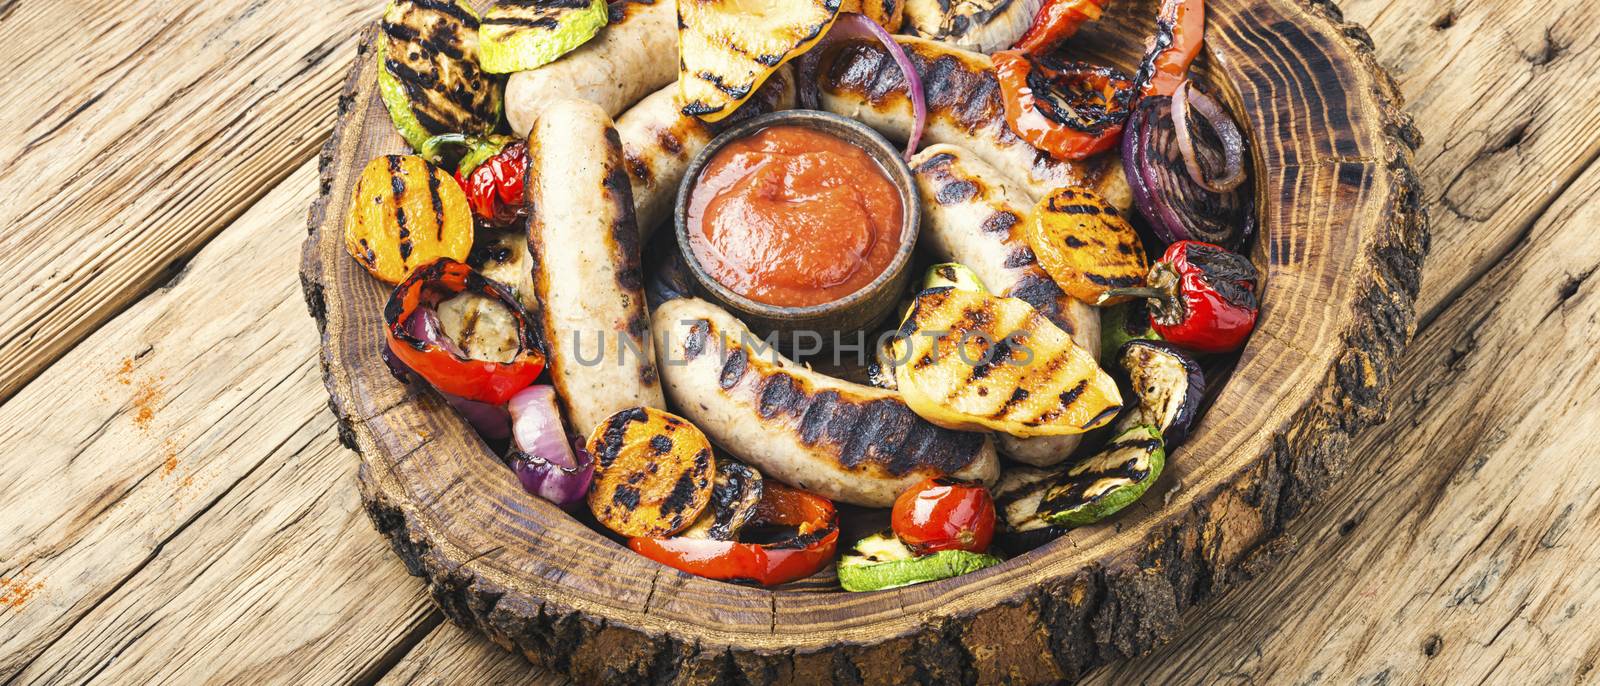 Grilled sausages and vegetables with sauce ketchup on wooden tray.Bbq food